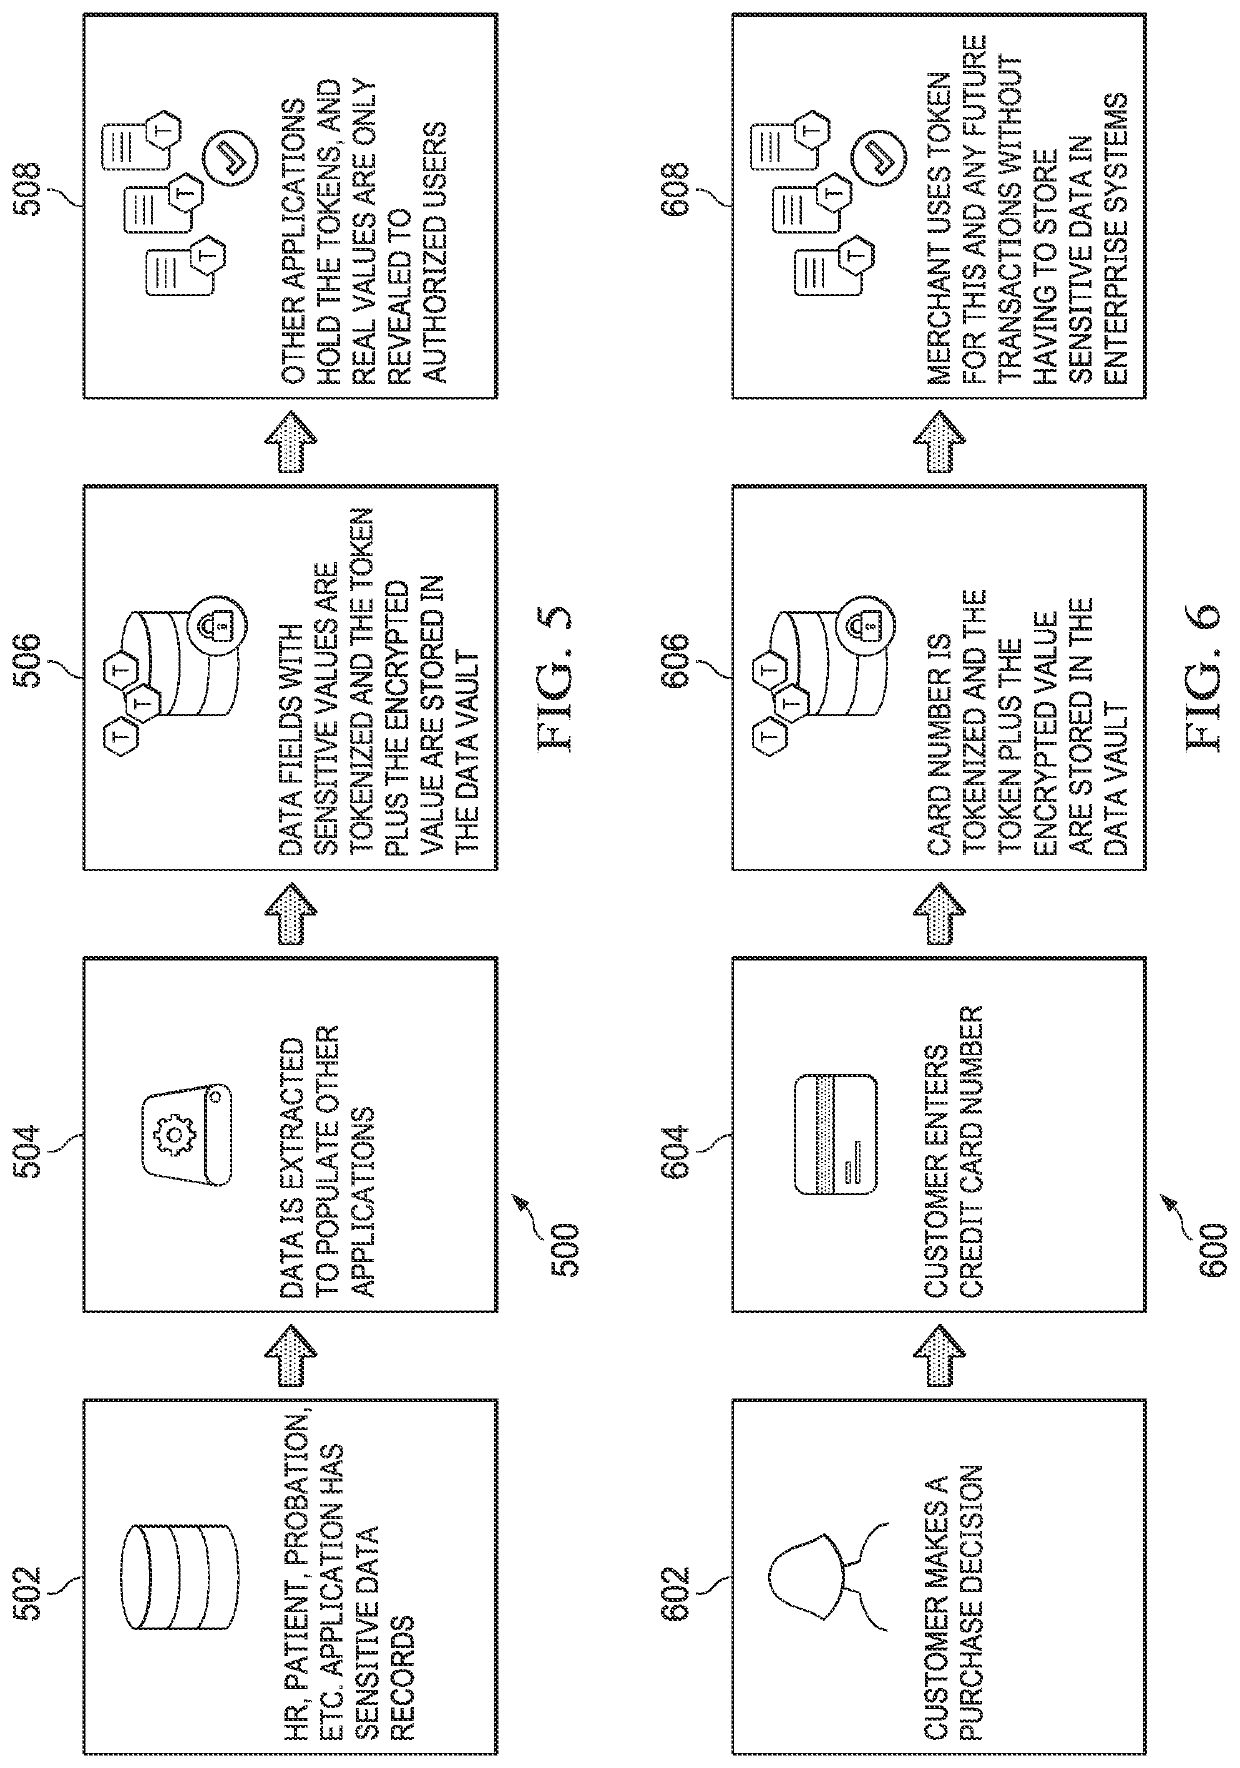 Token-based data security systems and methods for structured data